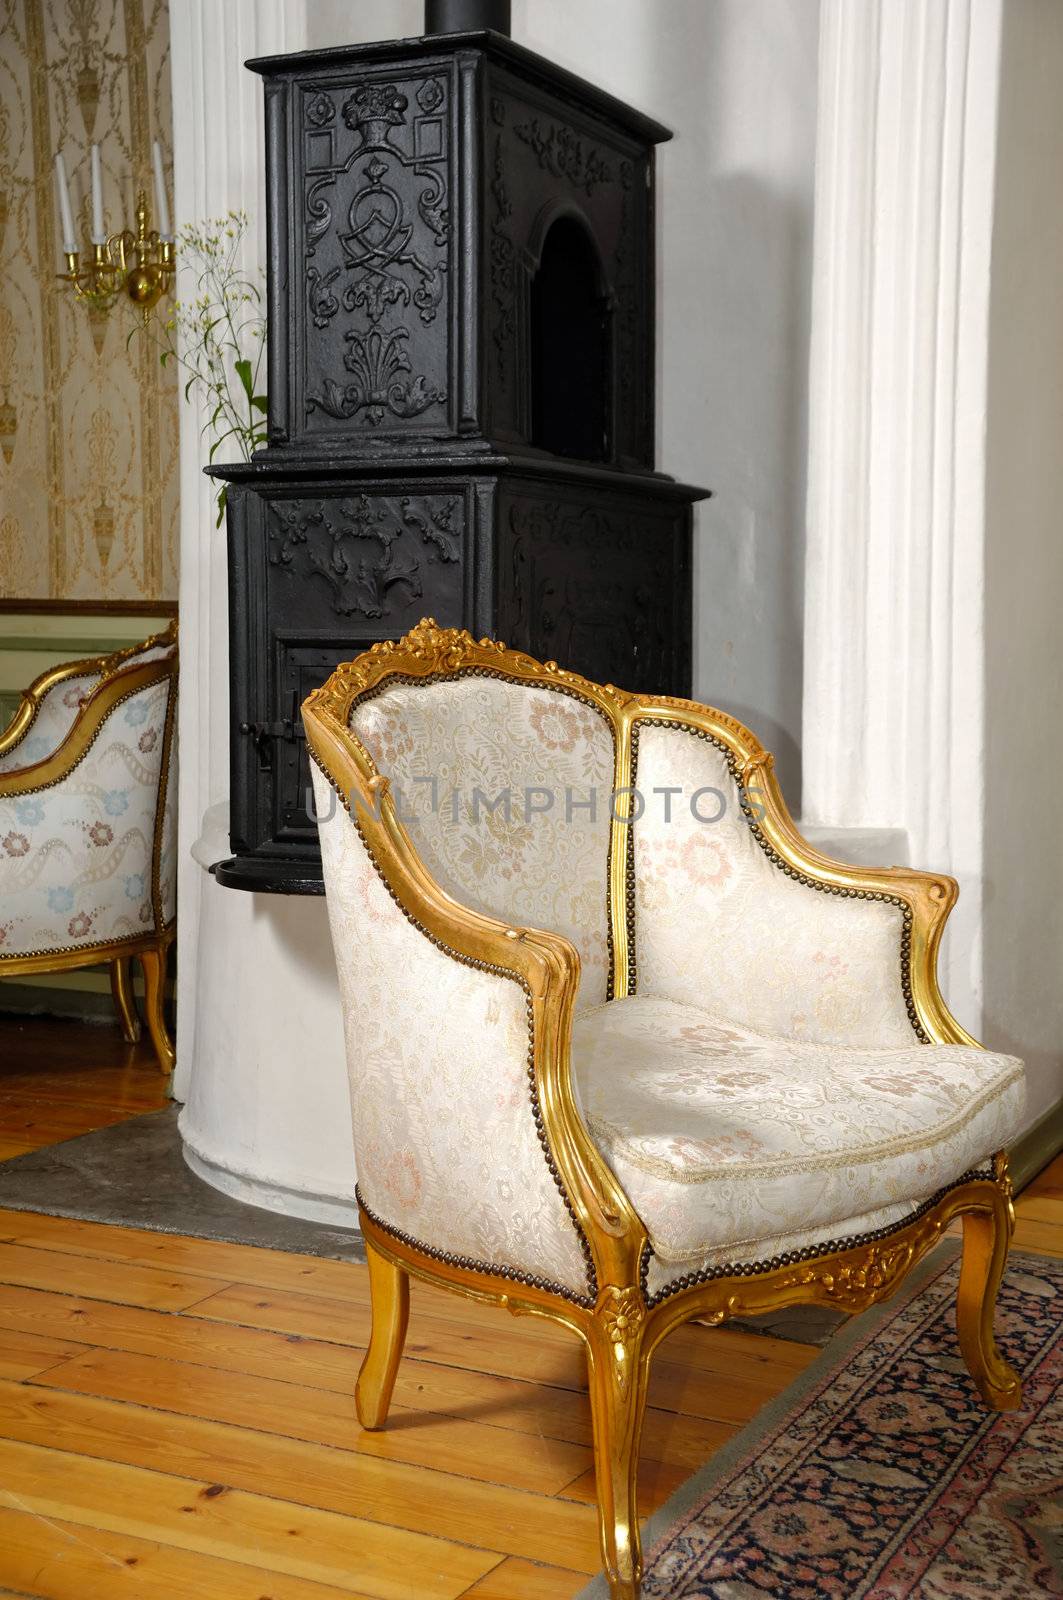 Elegant armchair and fireplace in the background